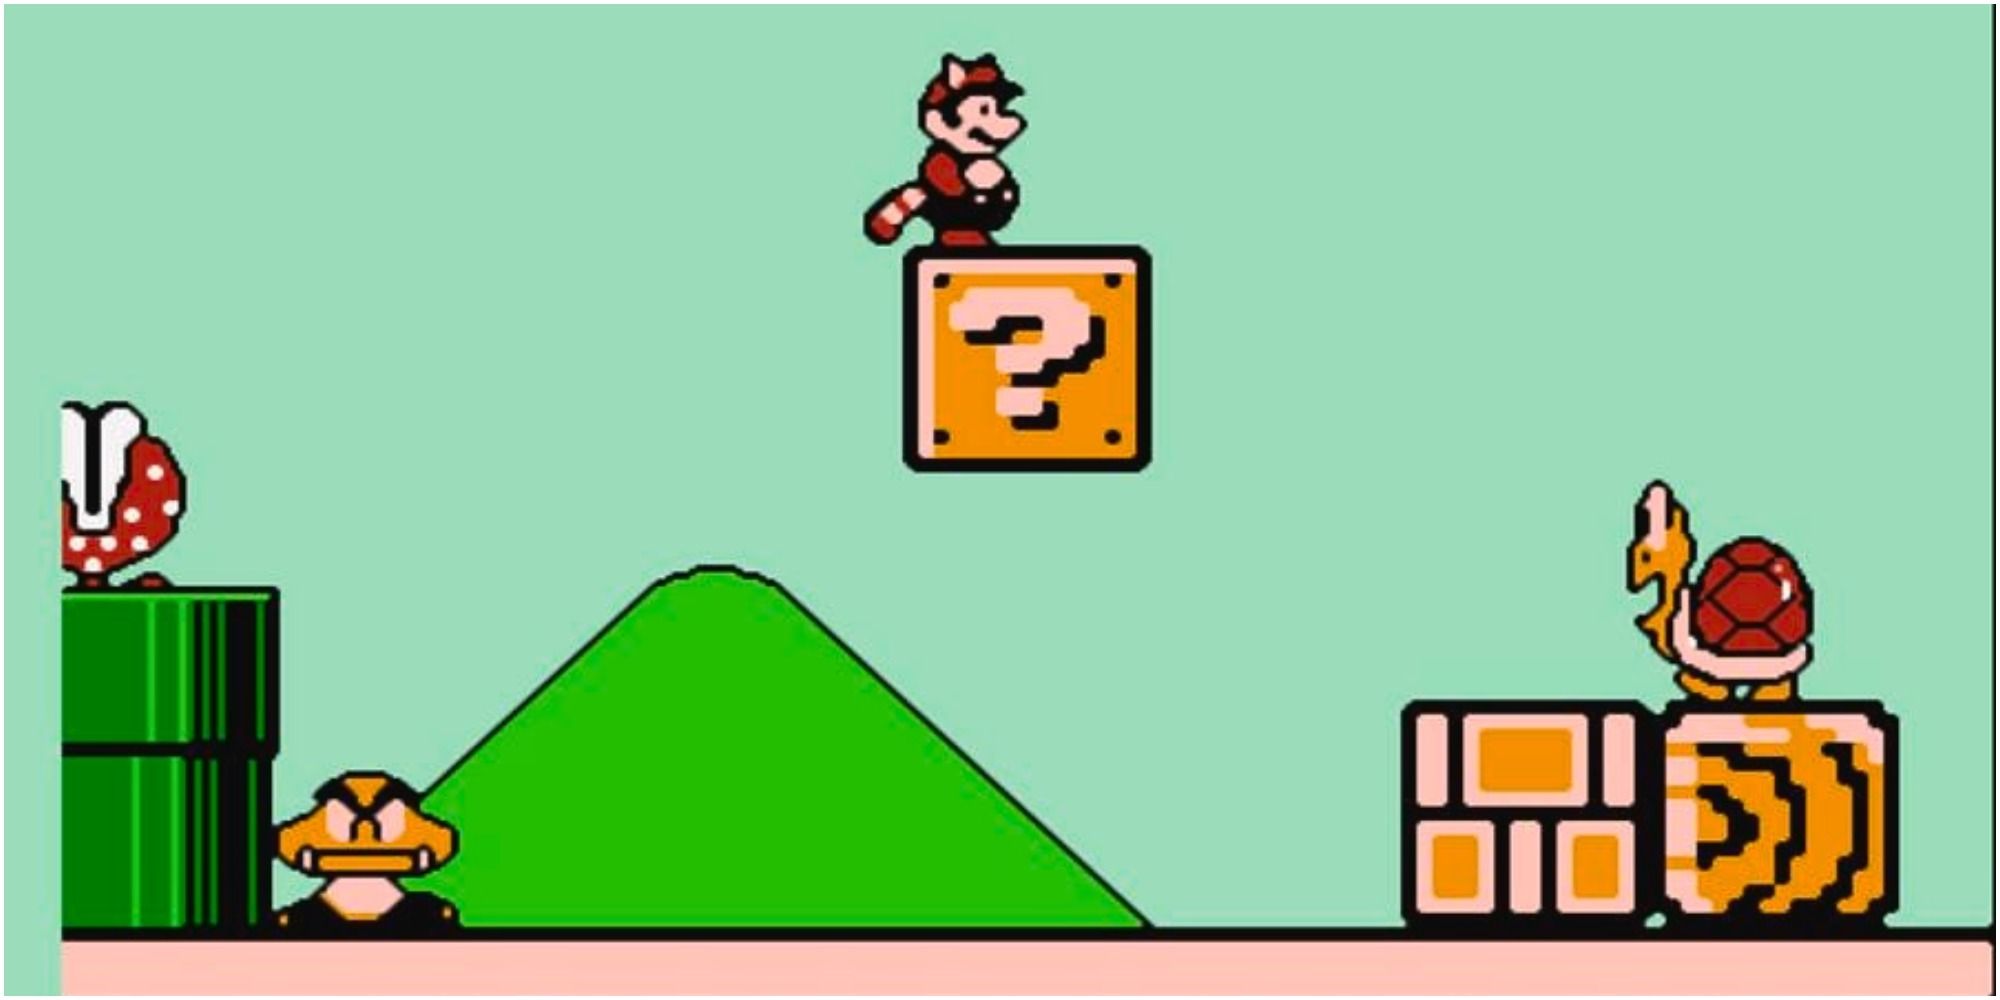 Mario standing on a block in Giant World from Super Mario Bros. 3.